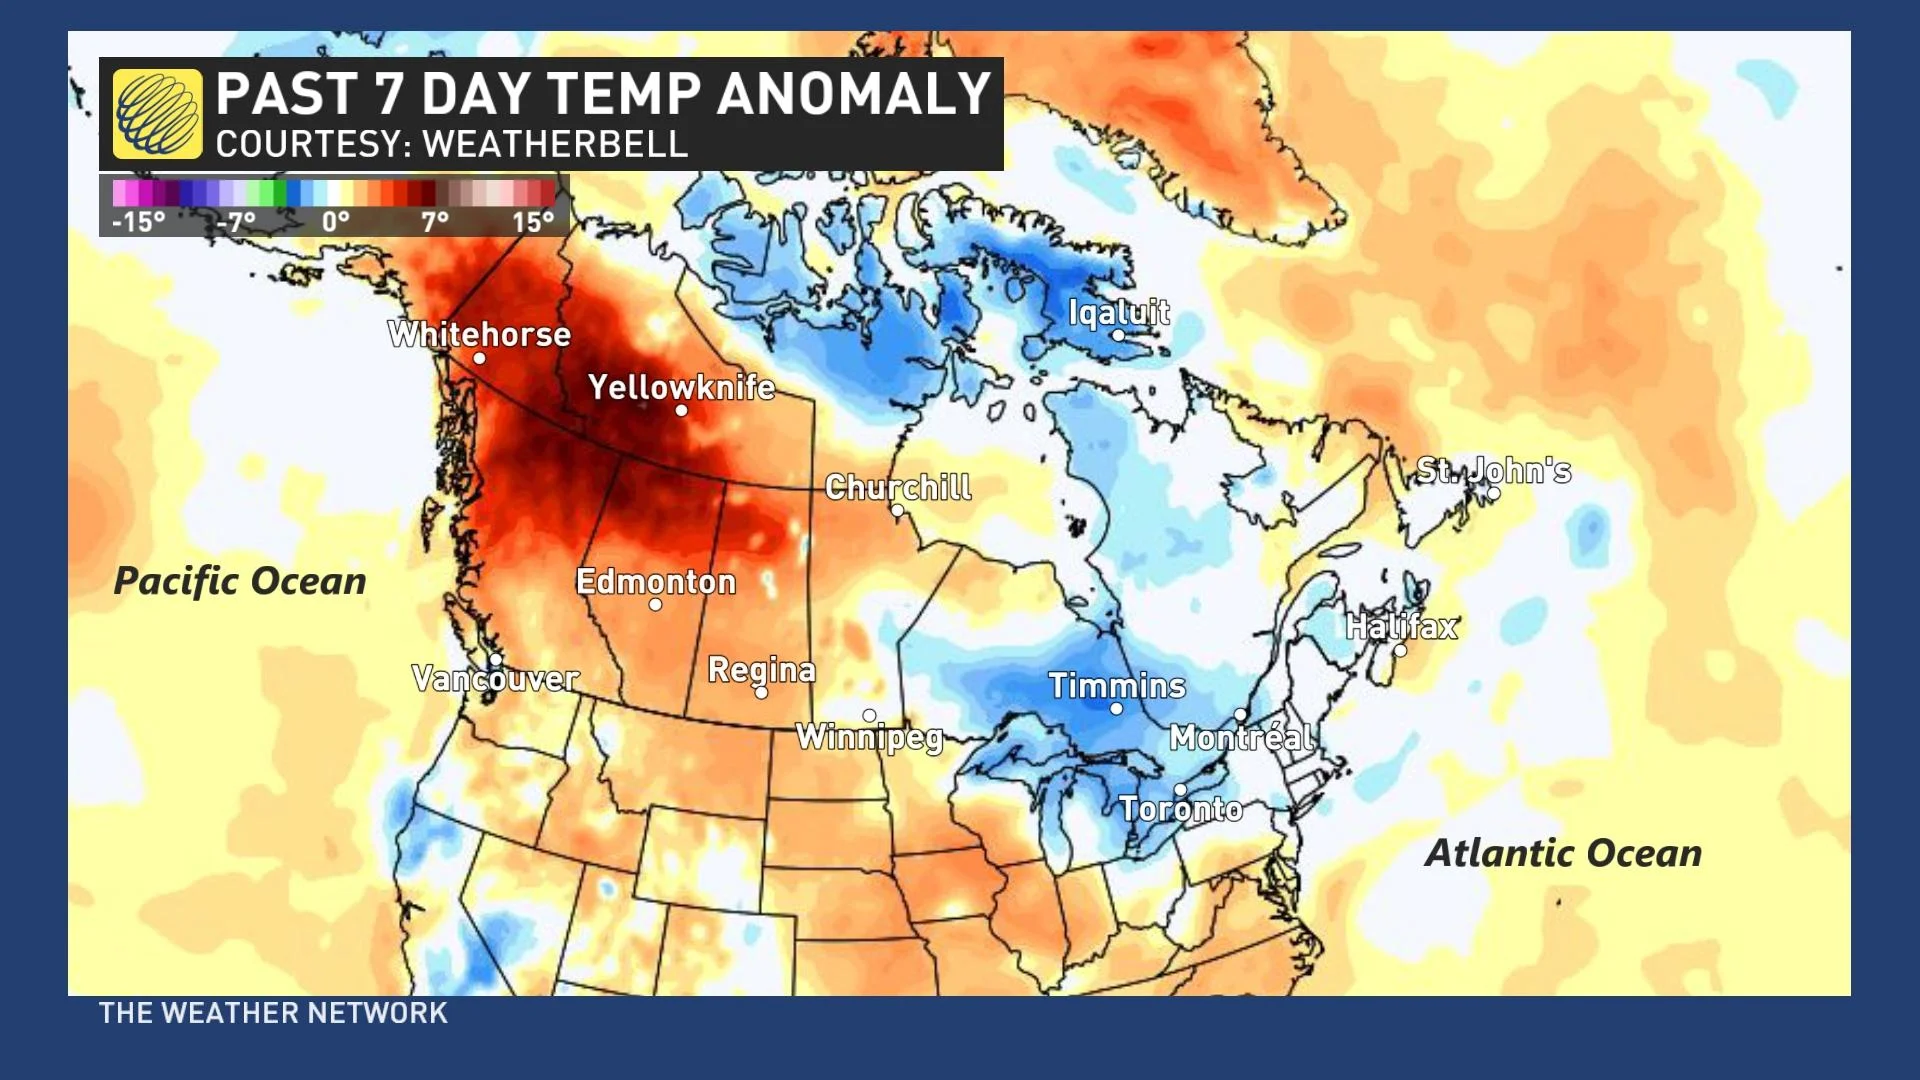 Pasts seven-day temp anomaly